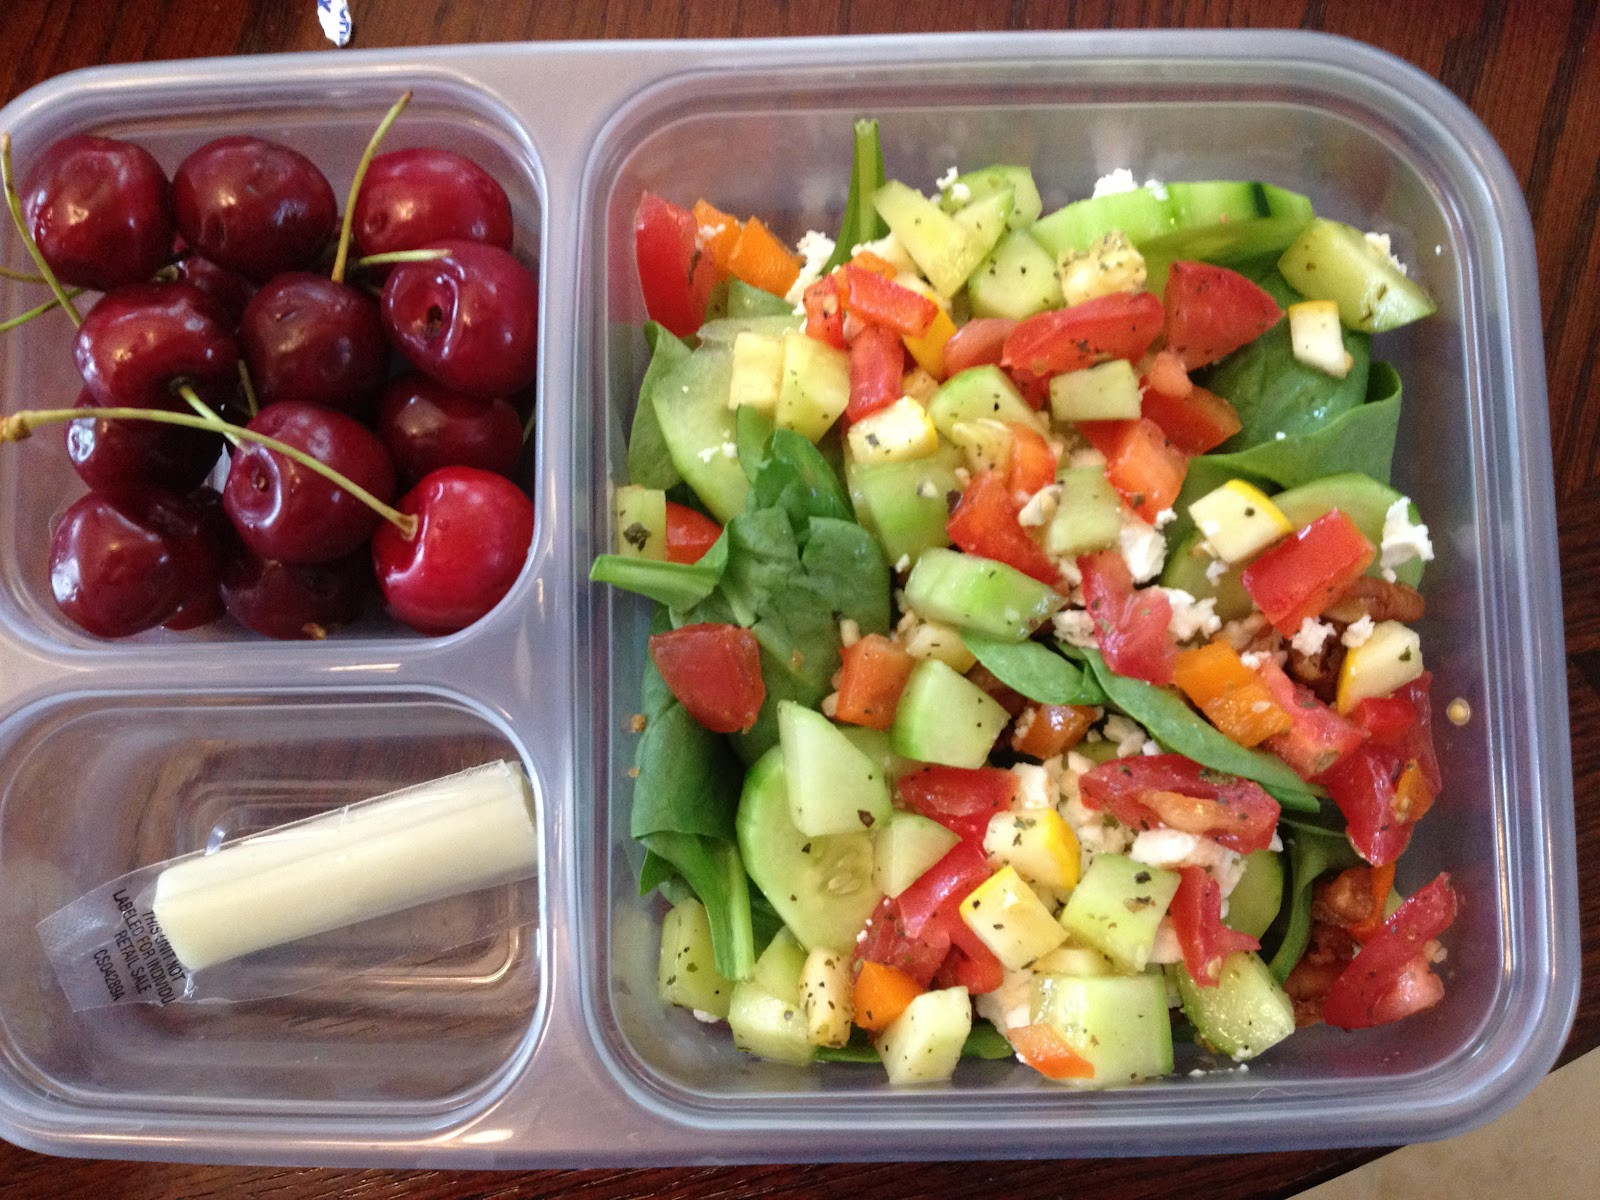 Healthy Packed Lunches for Adults top 20 Beautiful Eats Packed Lunches for Adults